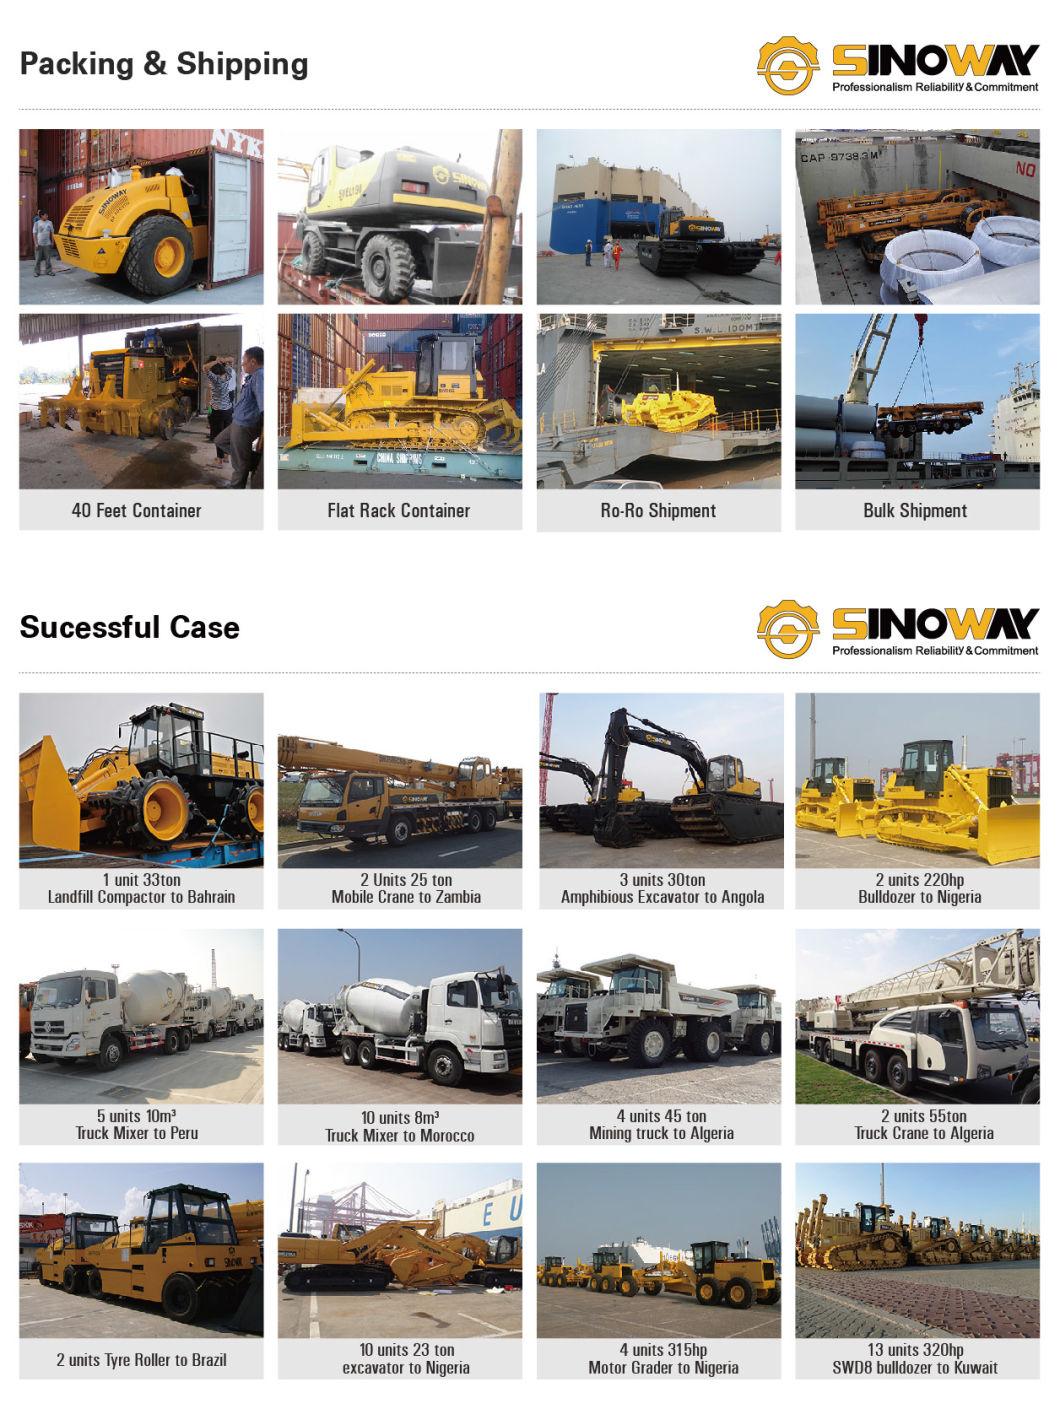 5 Sided Towed Impact Compactors 12 Ton Roller Compactors for Sale